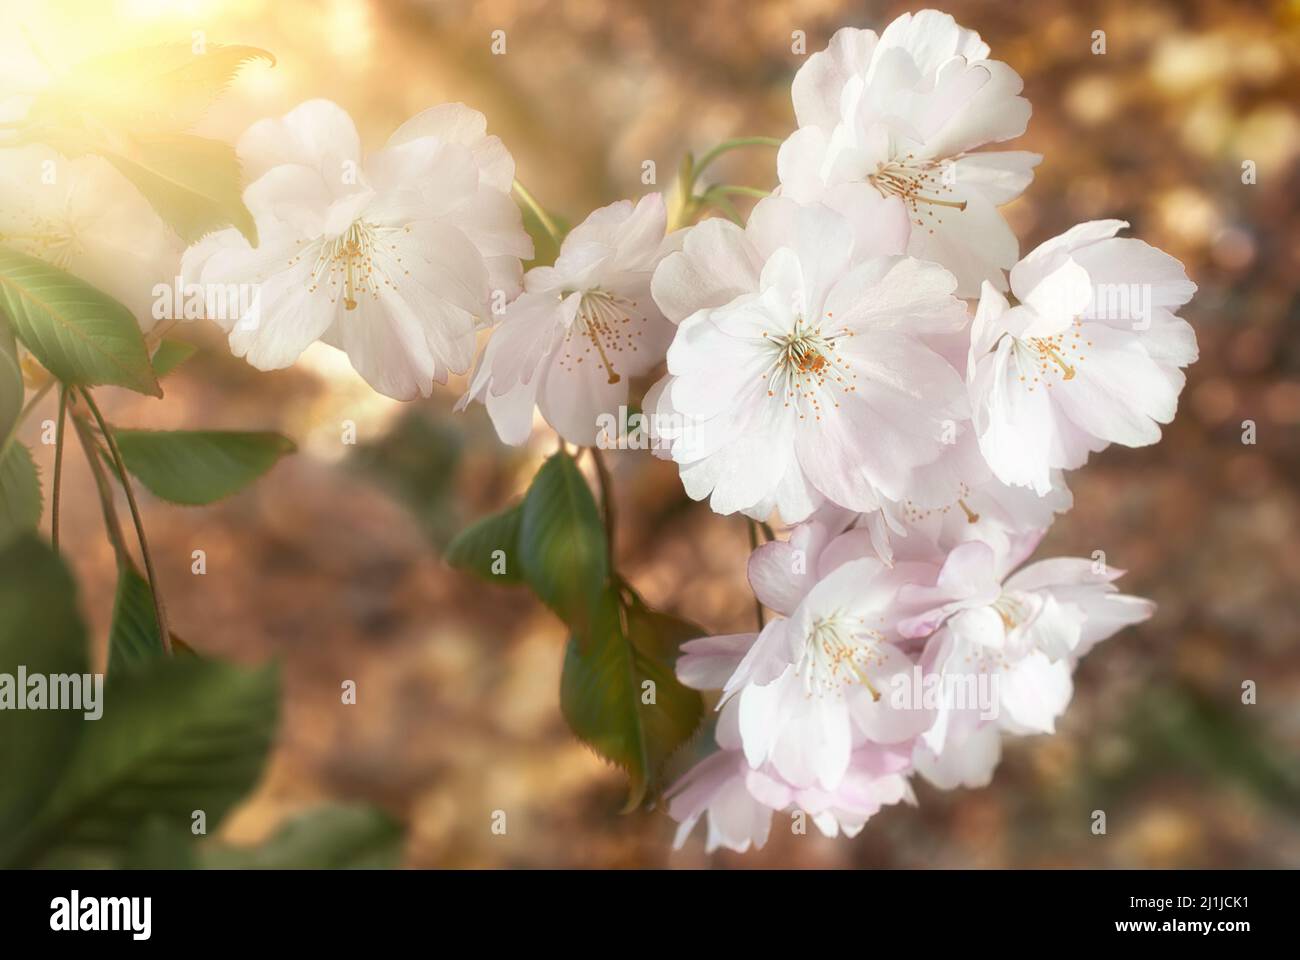 Closeup of beautiful cherry blossoms with blurred background and warm sunshine. Stylized colors emphasize the softness of the flowers Stock Photo